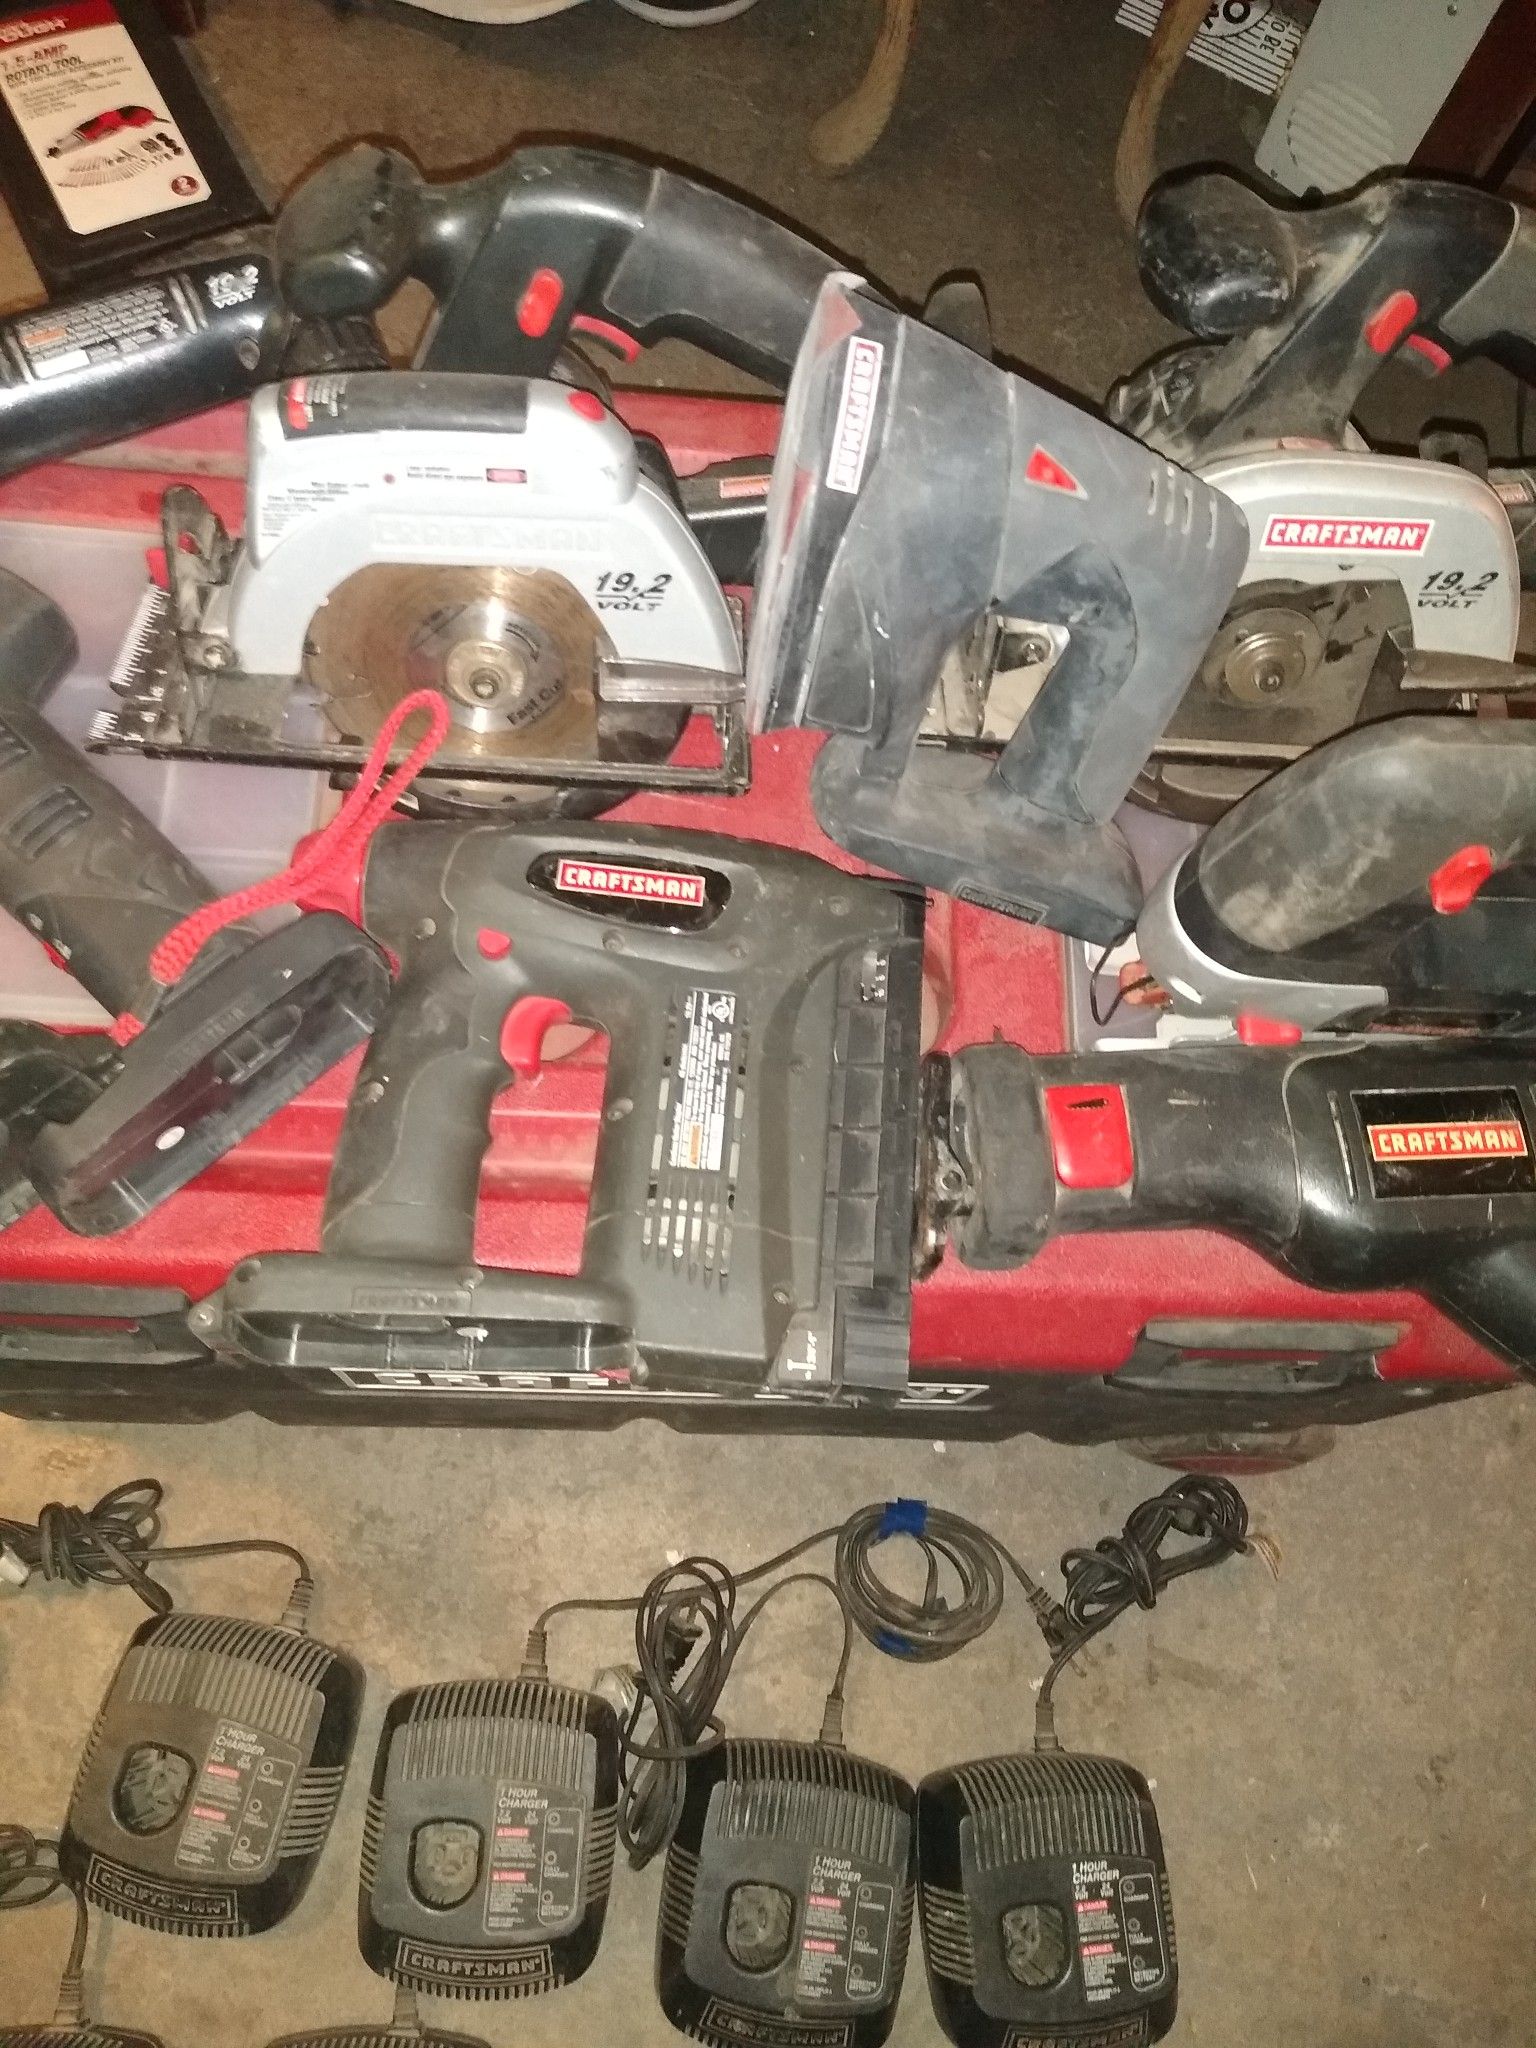 FOR TODAY N TODAY ONLY!!!Craftsman 19.2 volts battery powered tools